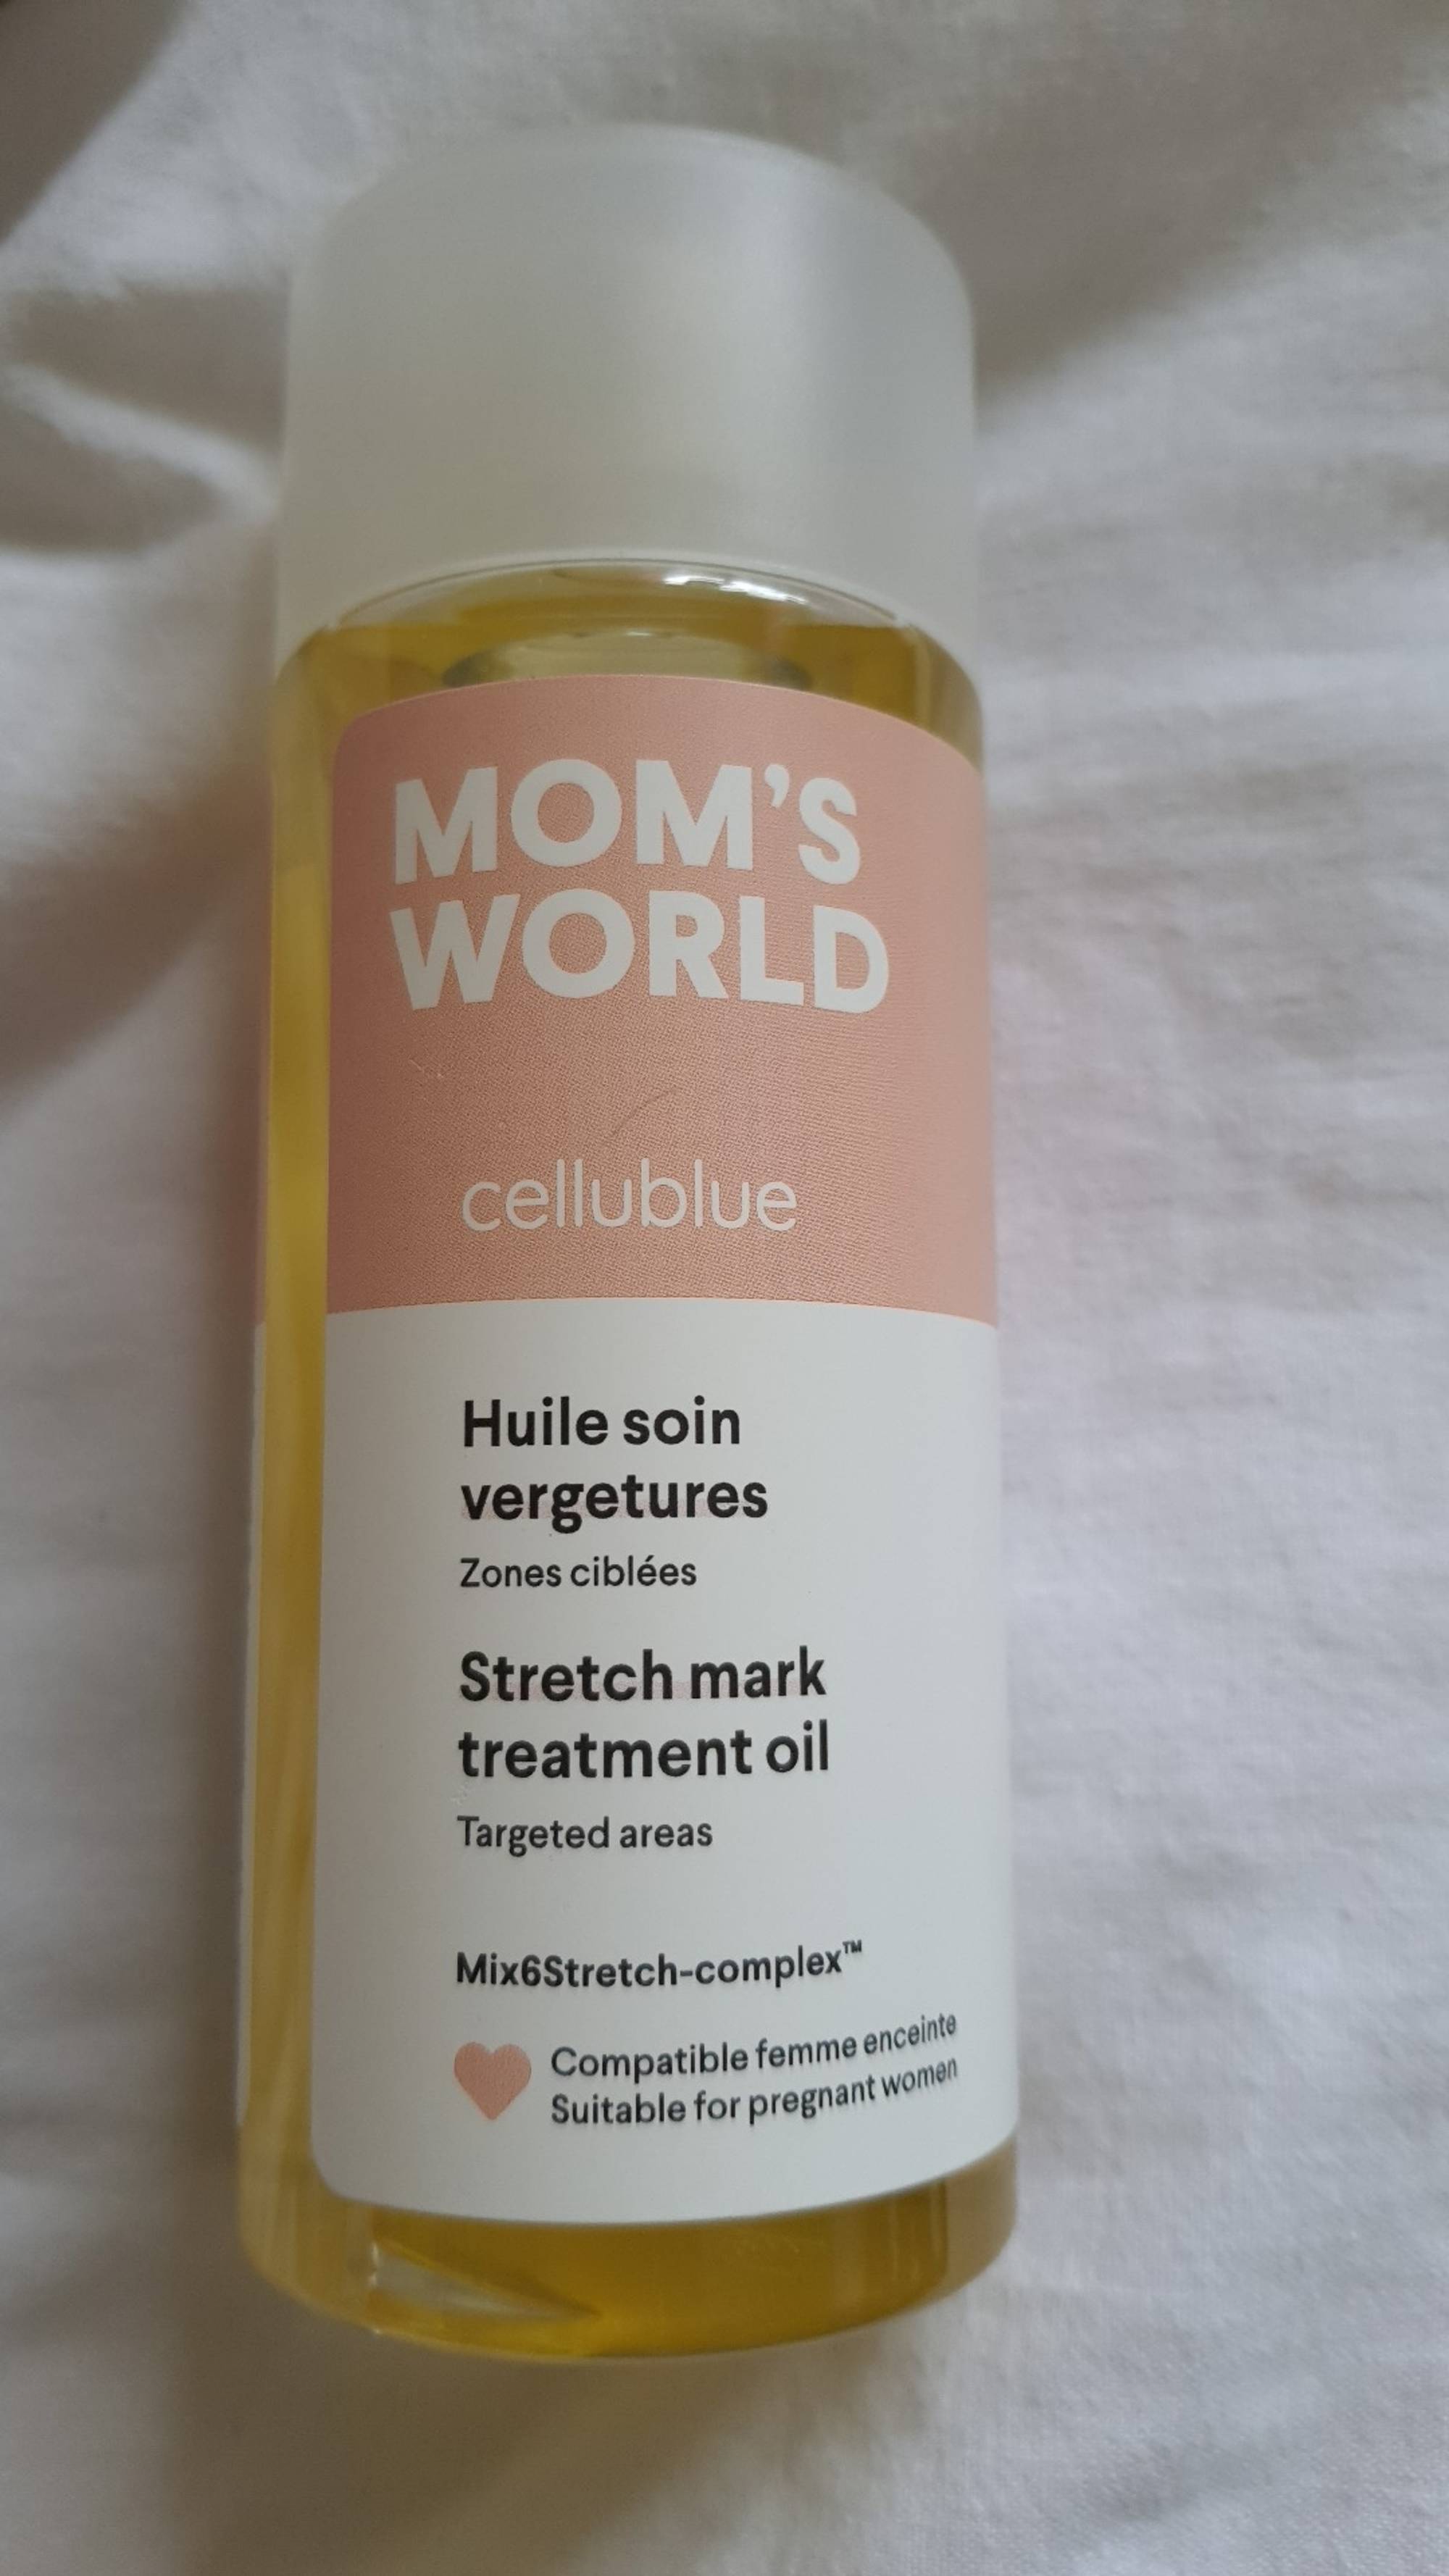 CELLUBLUE - Mom's World - Huile soin vergetures